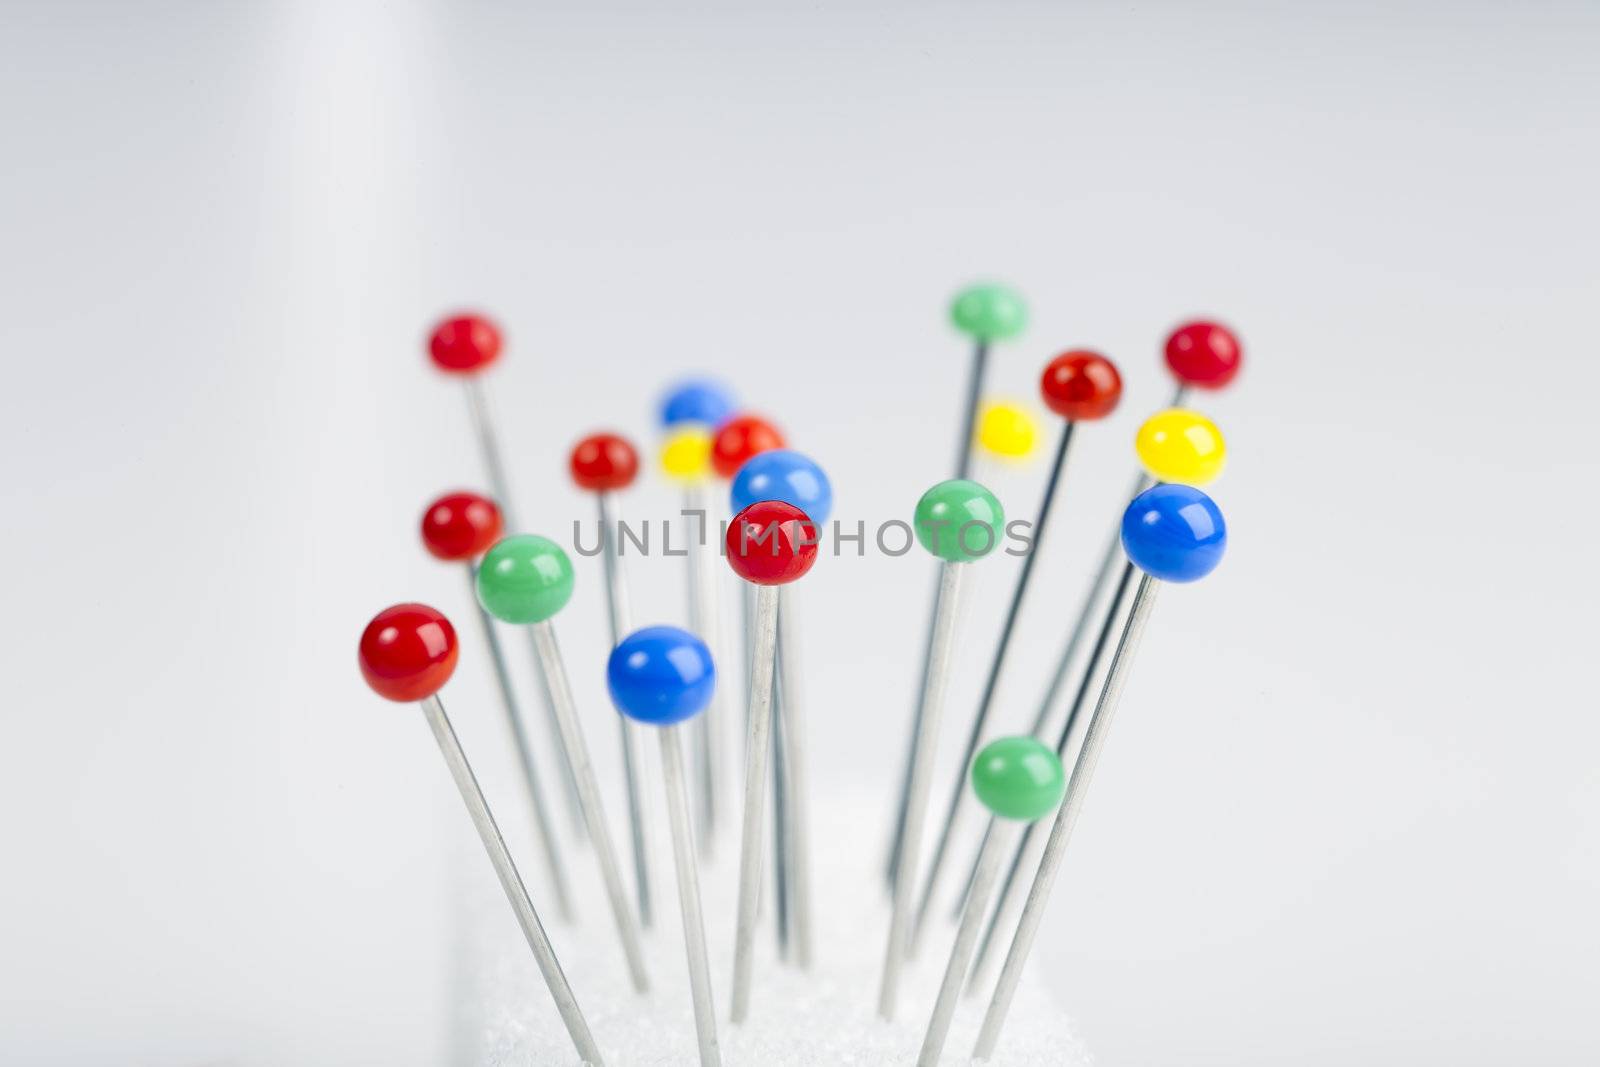 Colorful sewing pins.